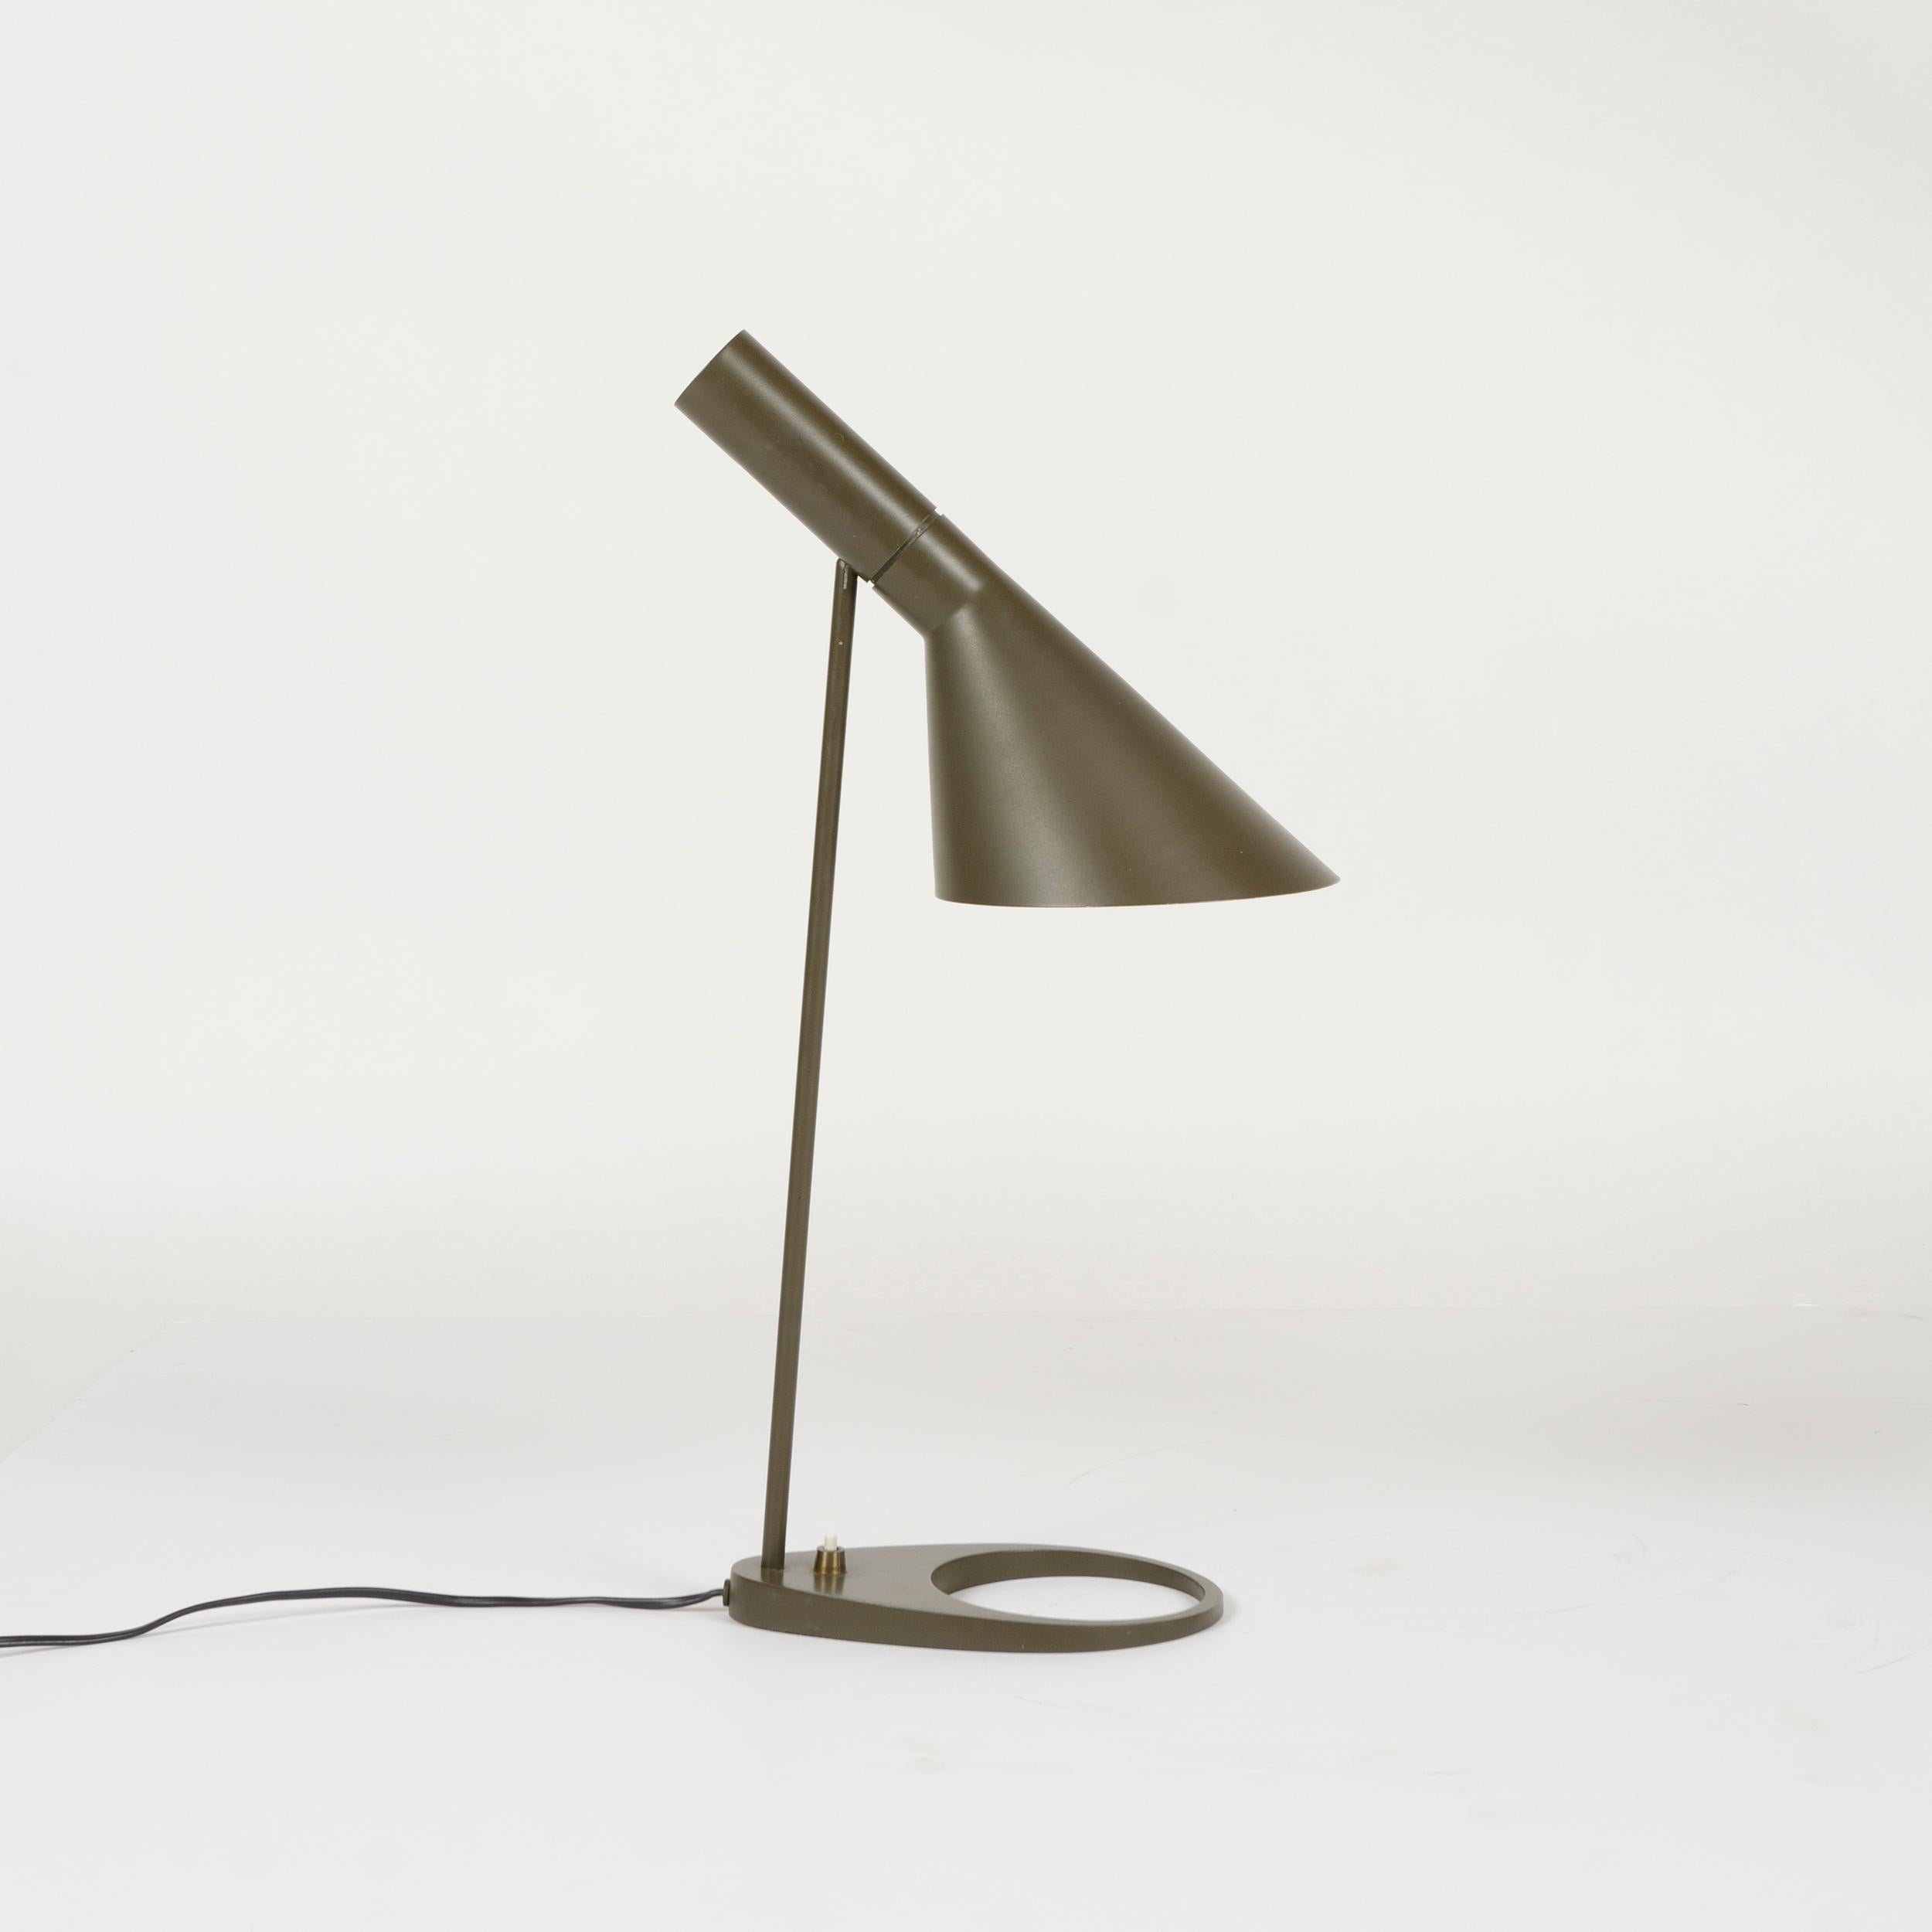 A painted metal desk lamp, having a pivoting 'offset funnel' shade floating above a pierced egg-form base.